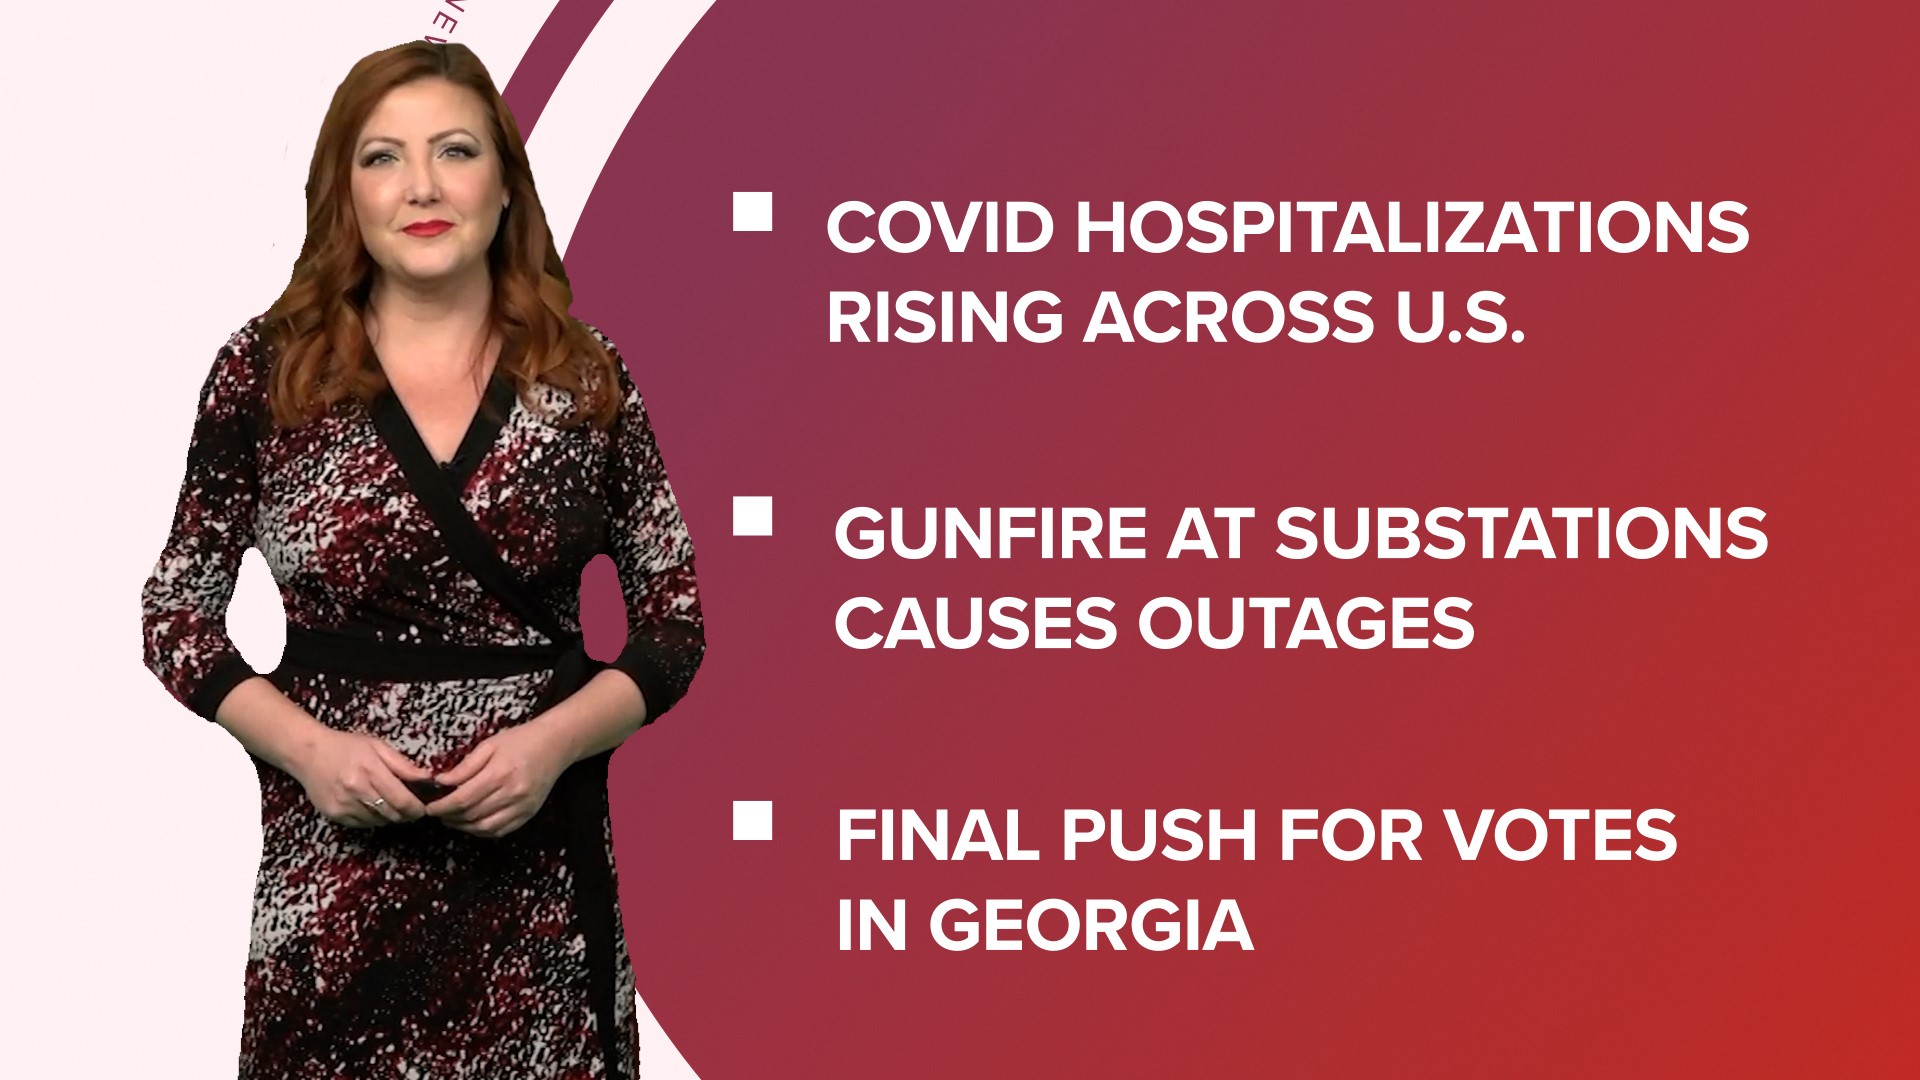 A look at what is happening in the news from a power outage in North Carolina due to gunfire at substations to final push for votes ahead of runoff in Georgia.